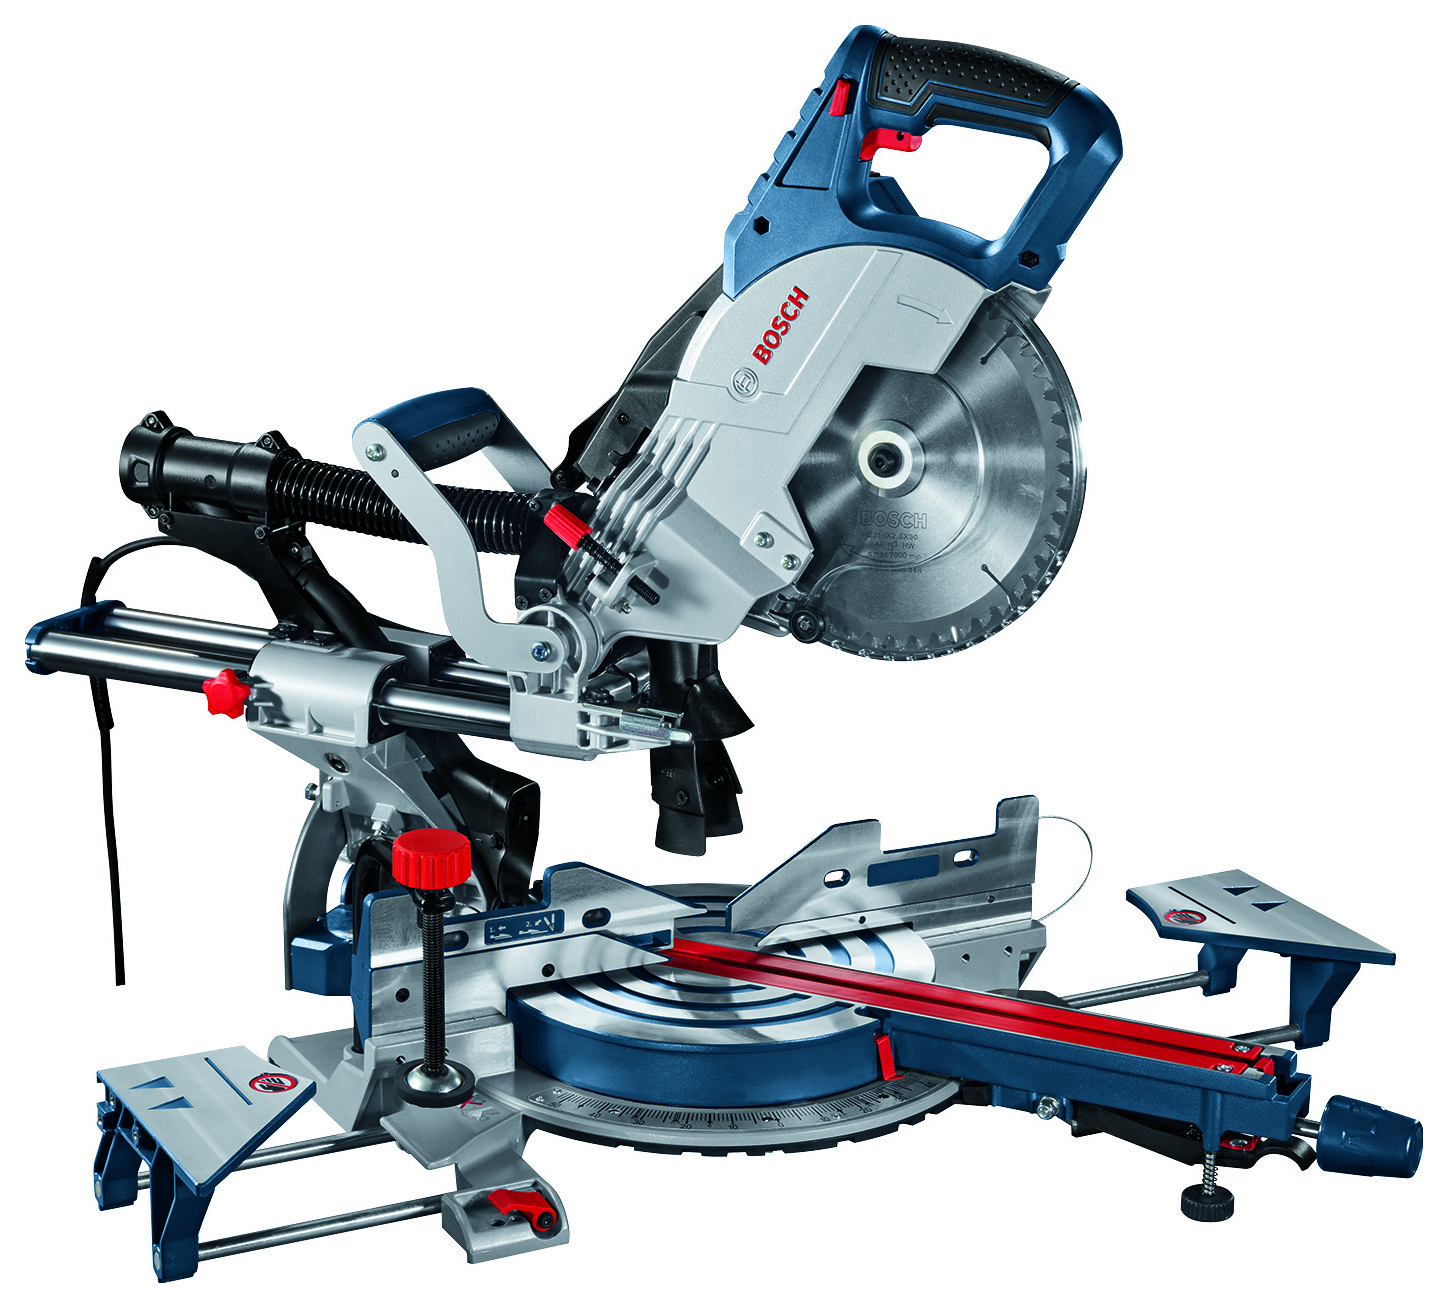 Image of Bosch Professional Gcm 8 Sjl (230V) Corded Mitre Saw, in, Size: 1600W